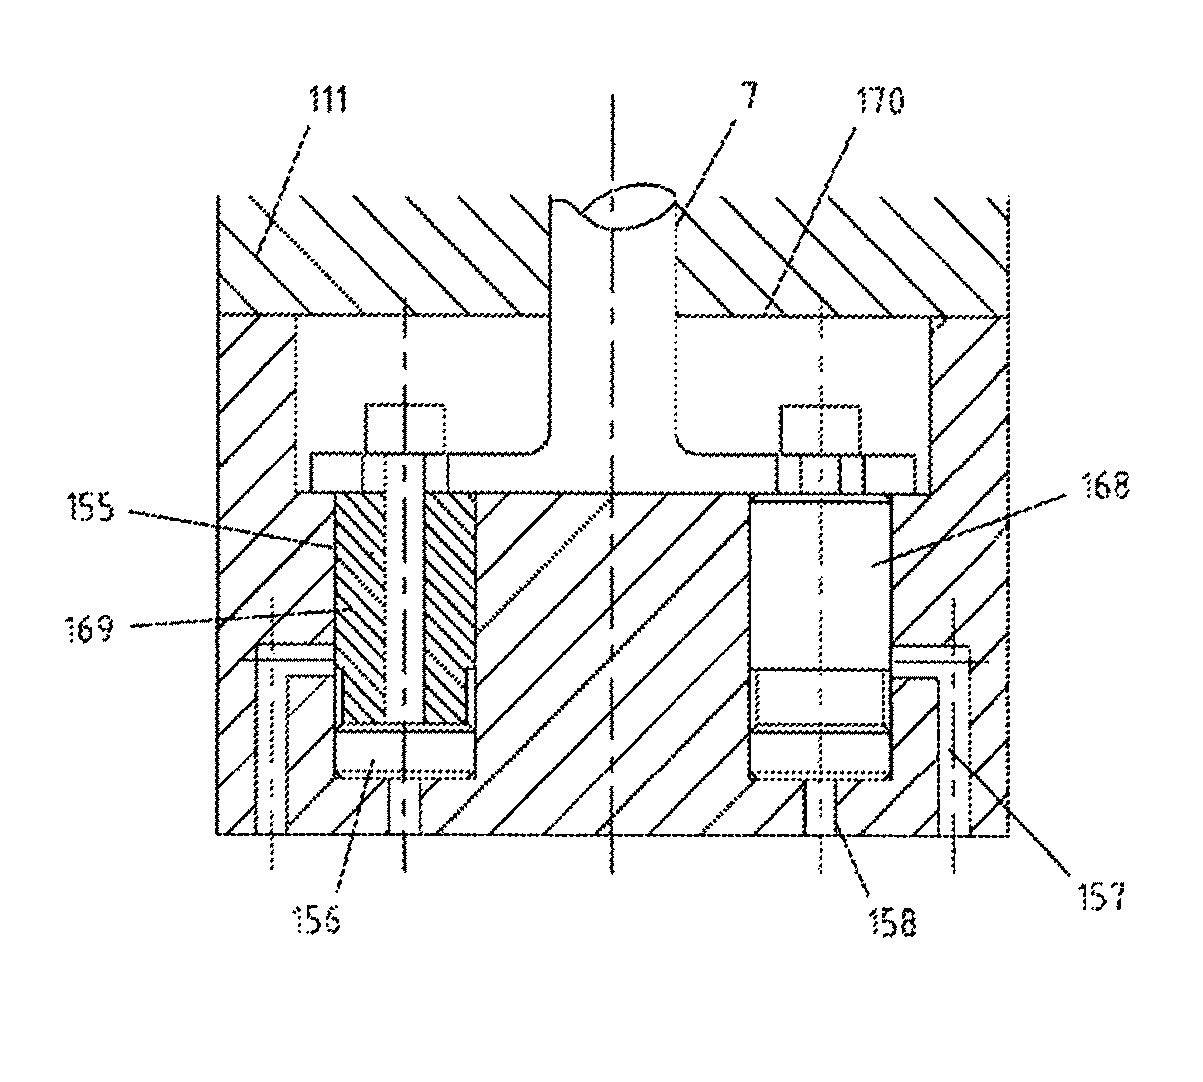 Lubricating apparatus and method for dosing cylinder lubrication oil